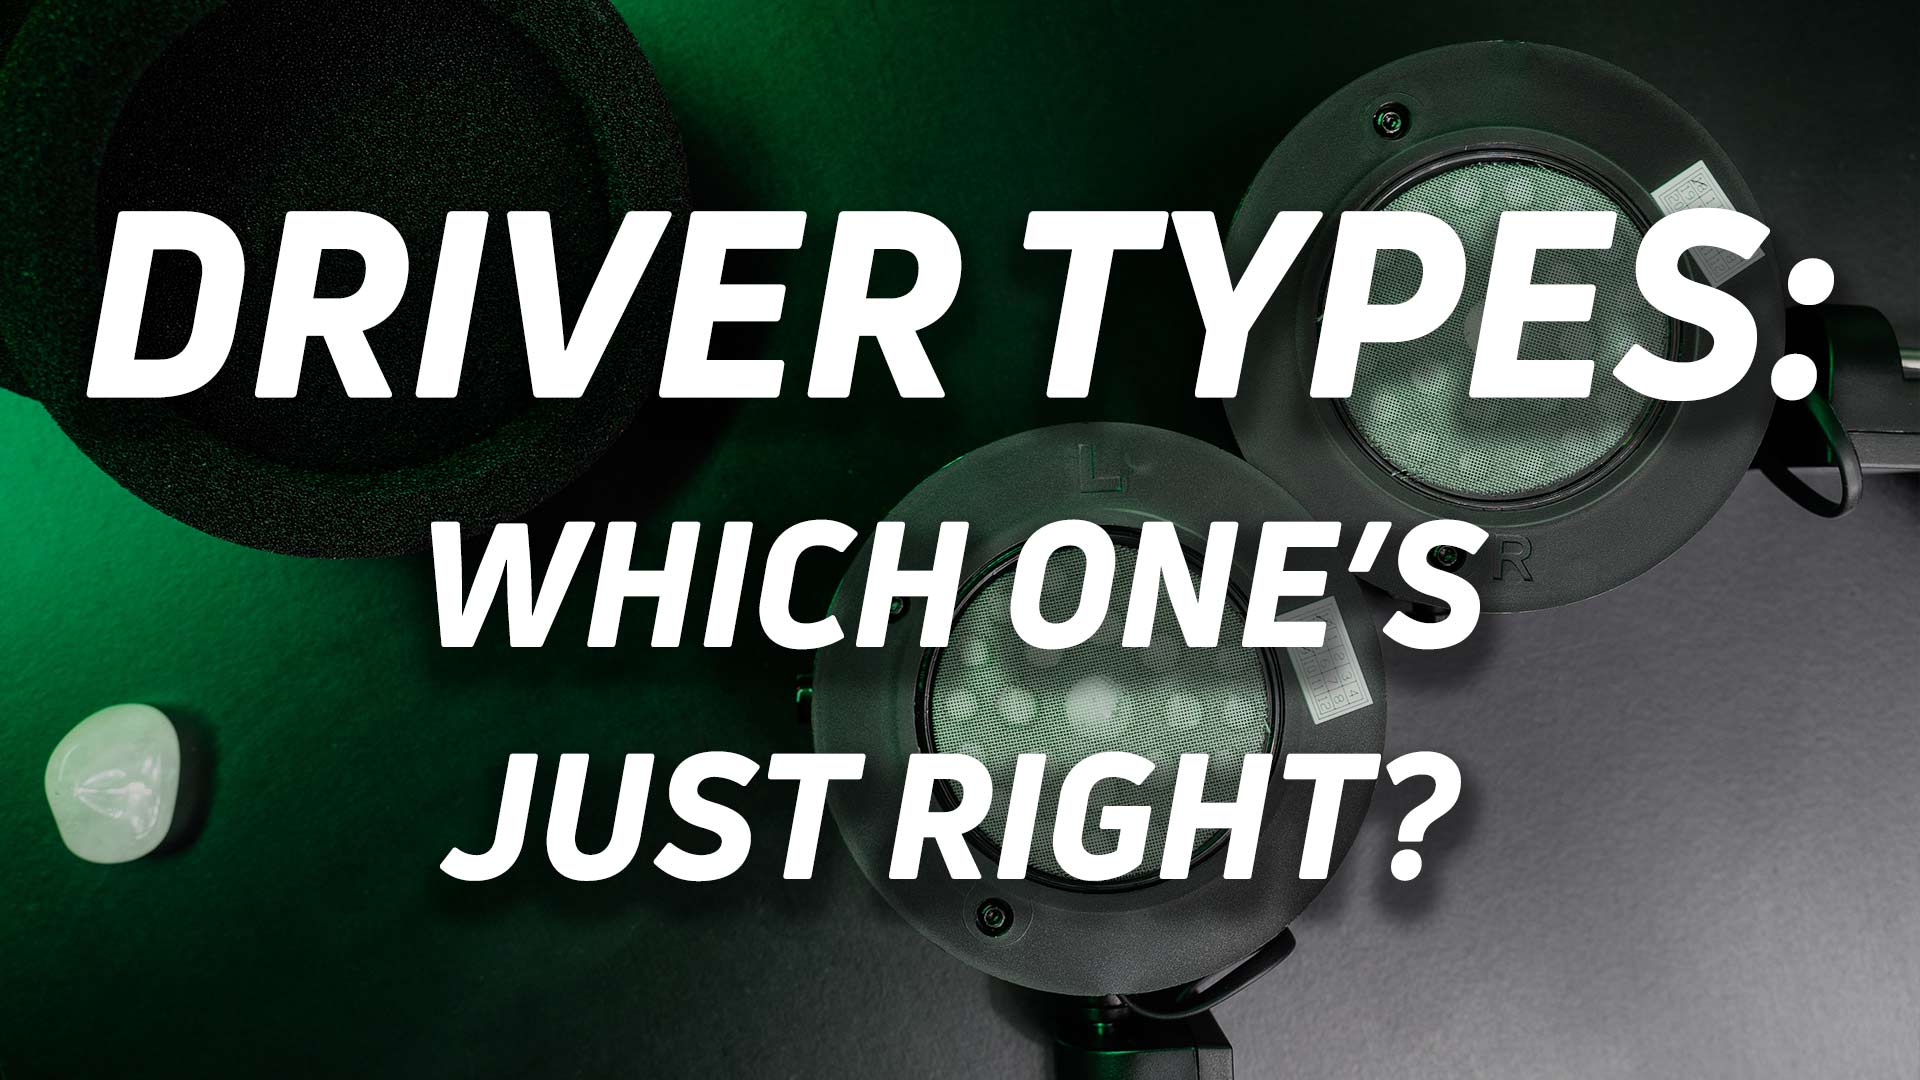 A photo of the Grado GW100 headphones with the text "Driver types: which one's just right?" overlayed.